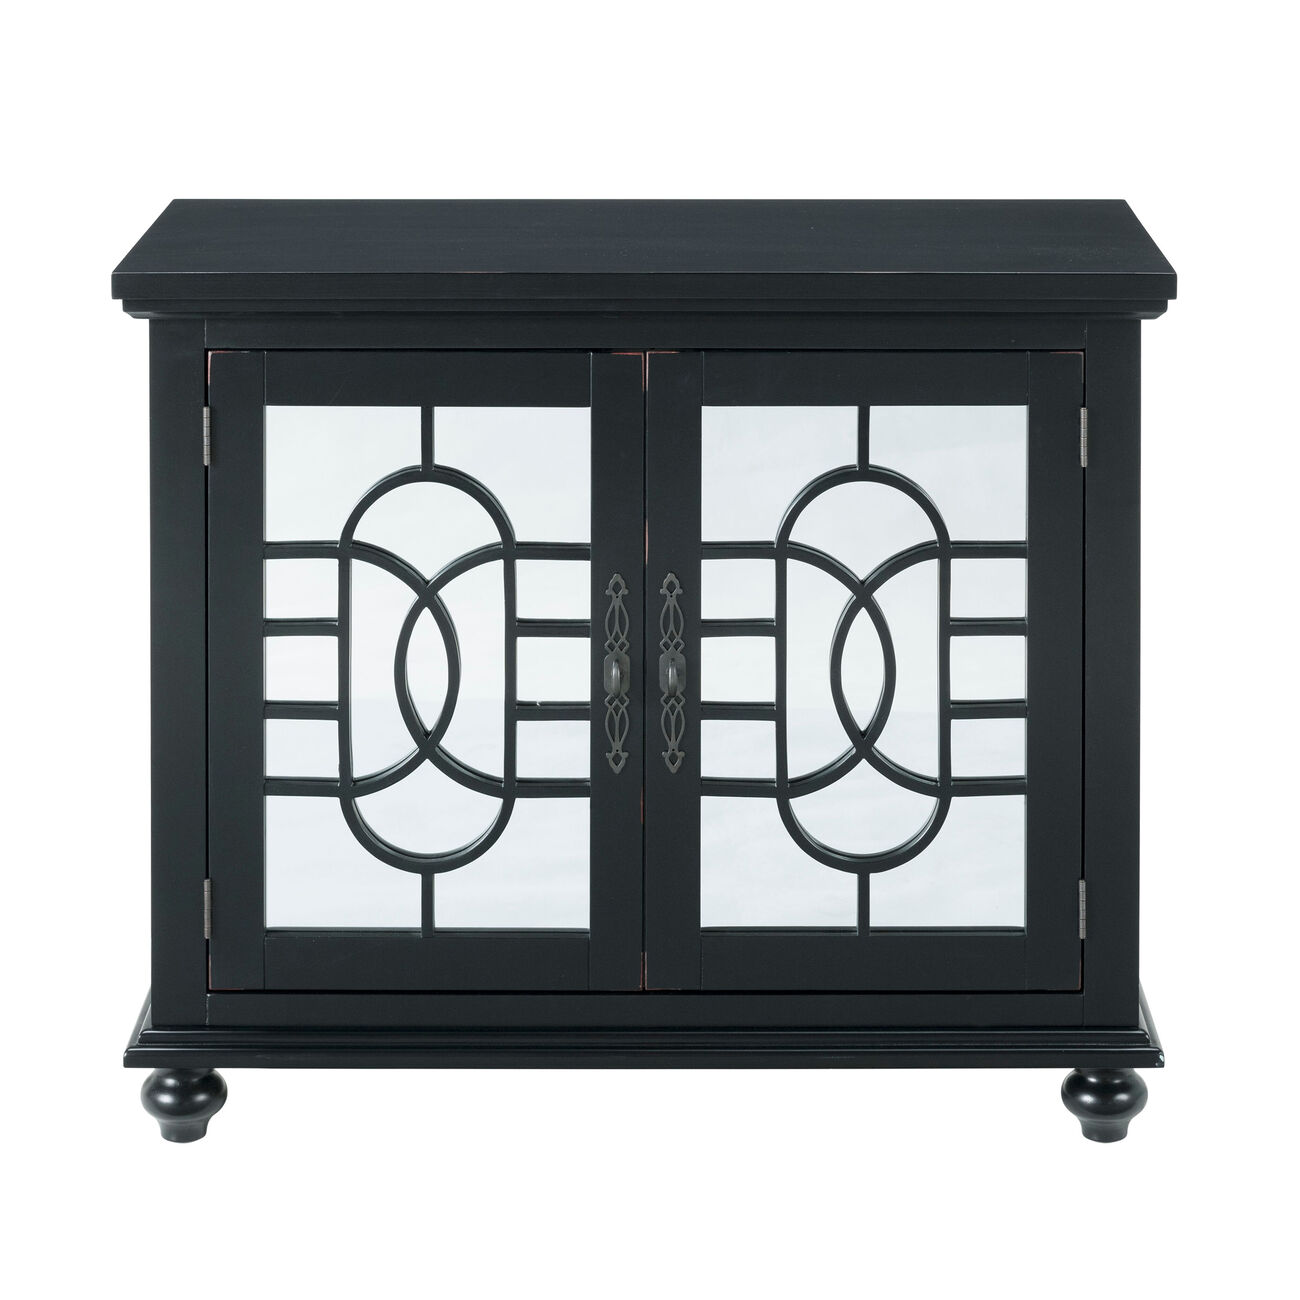 Transitional Wood and Glass TV Stand with Trellis Cabinet Front, Black